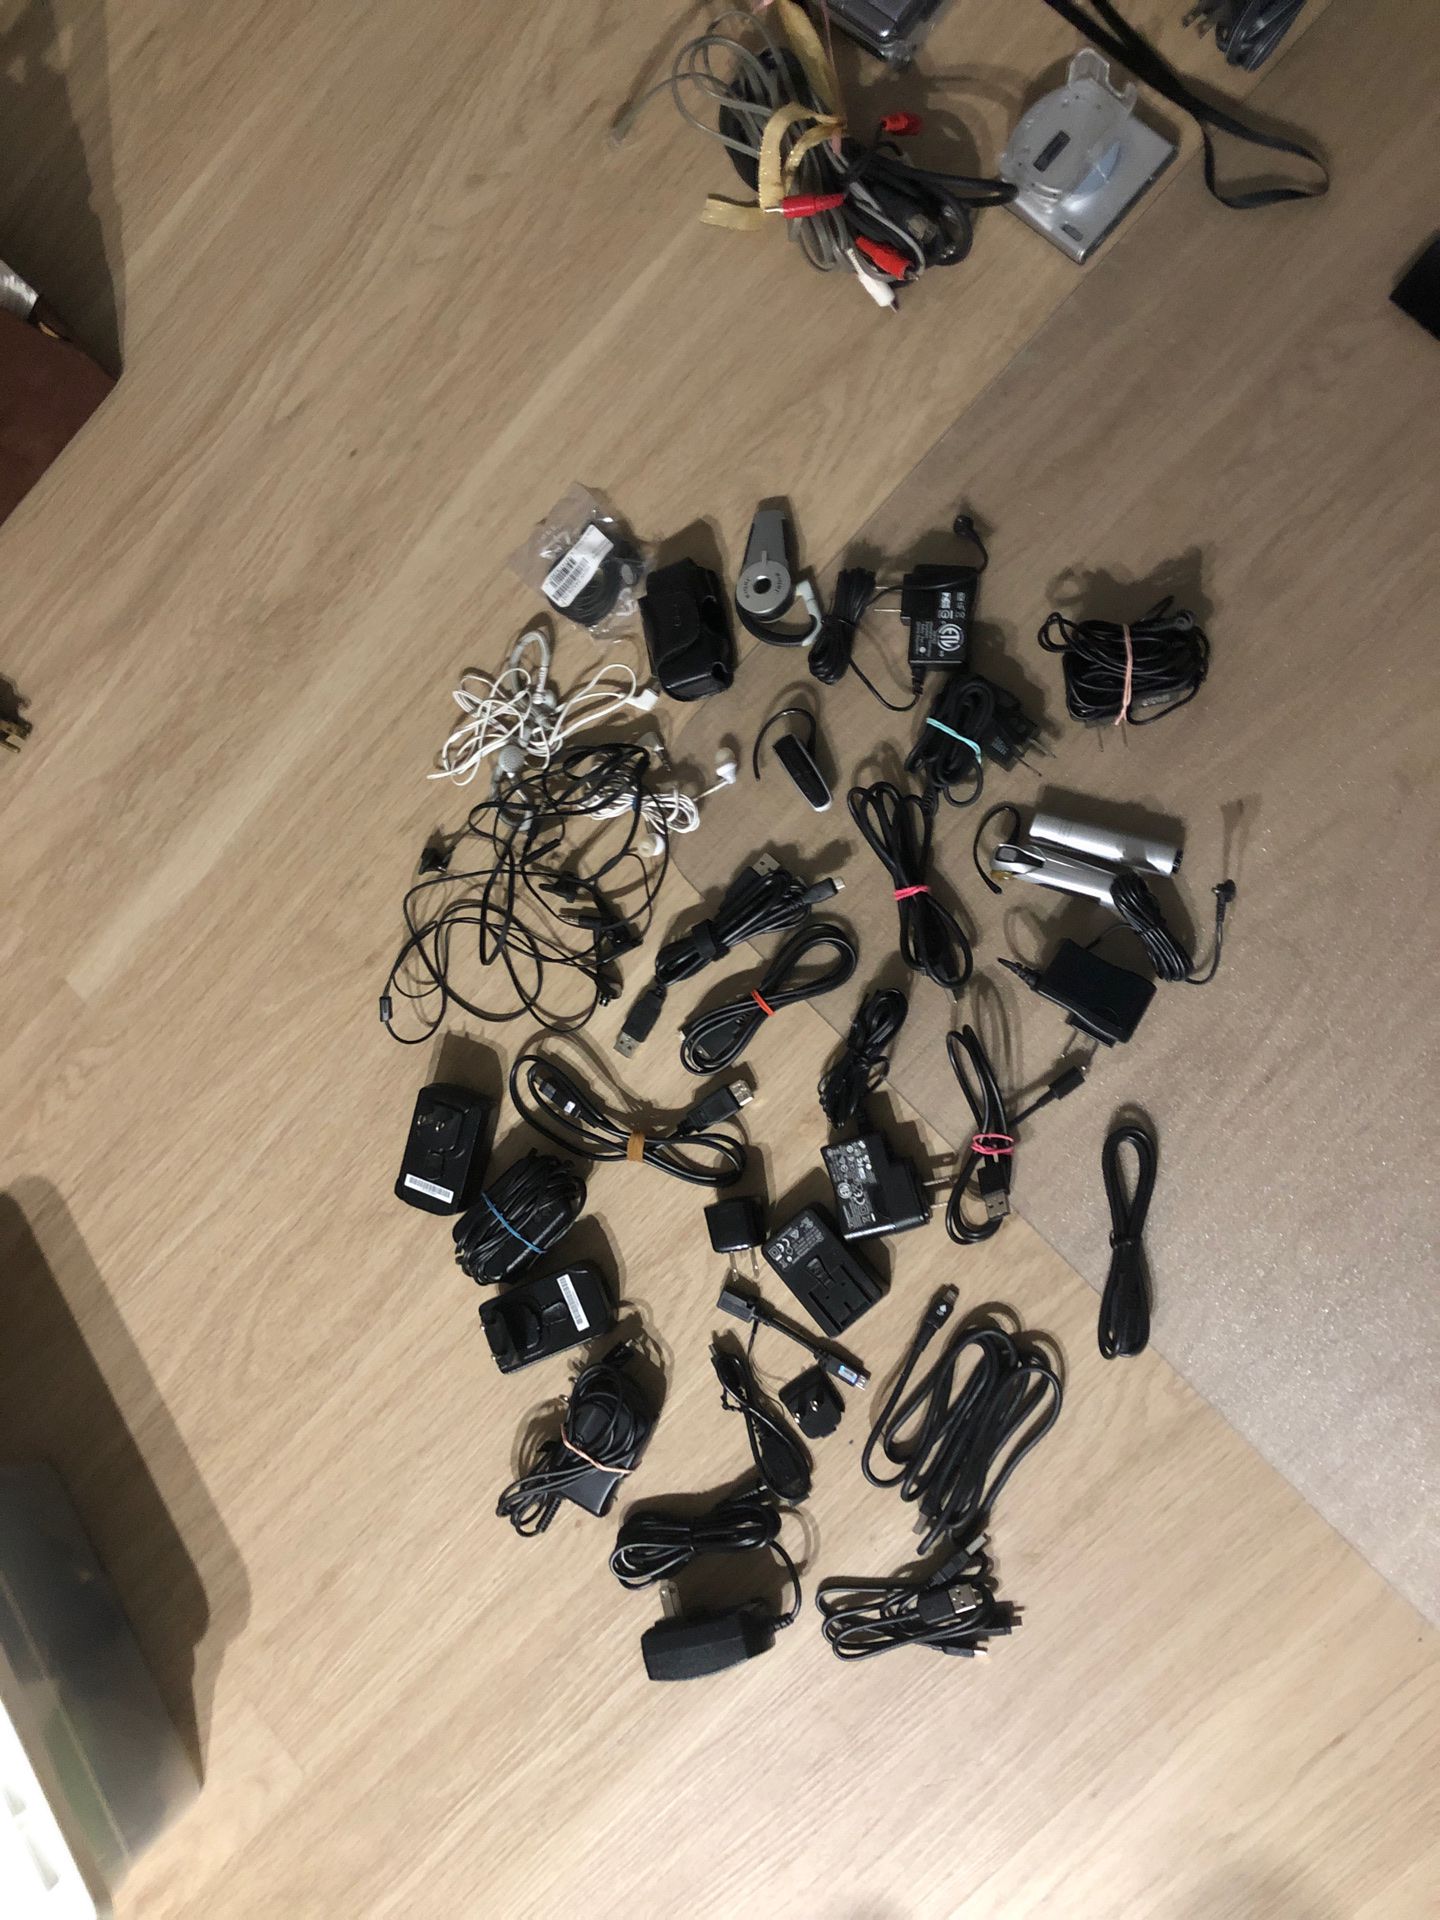 Various Chargers, BT headsets, USB cables